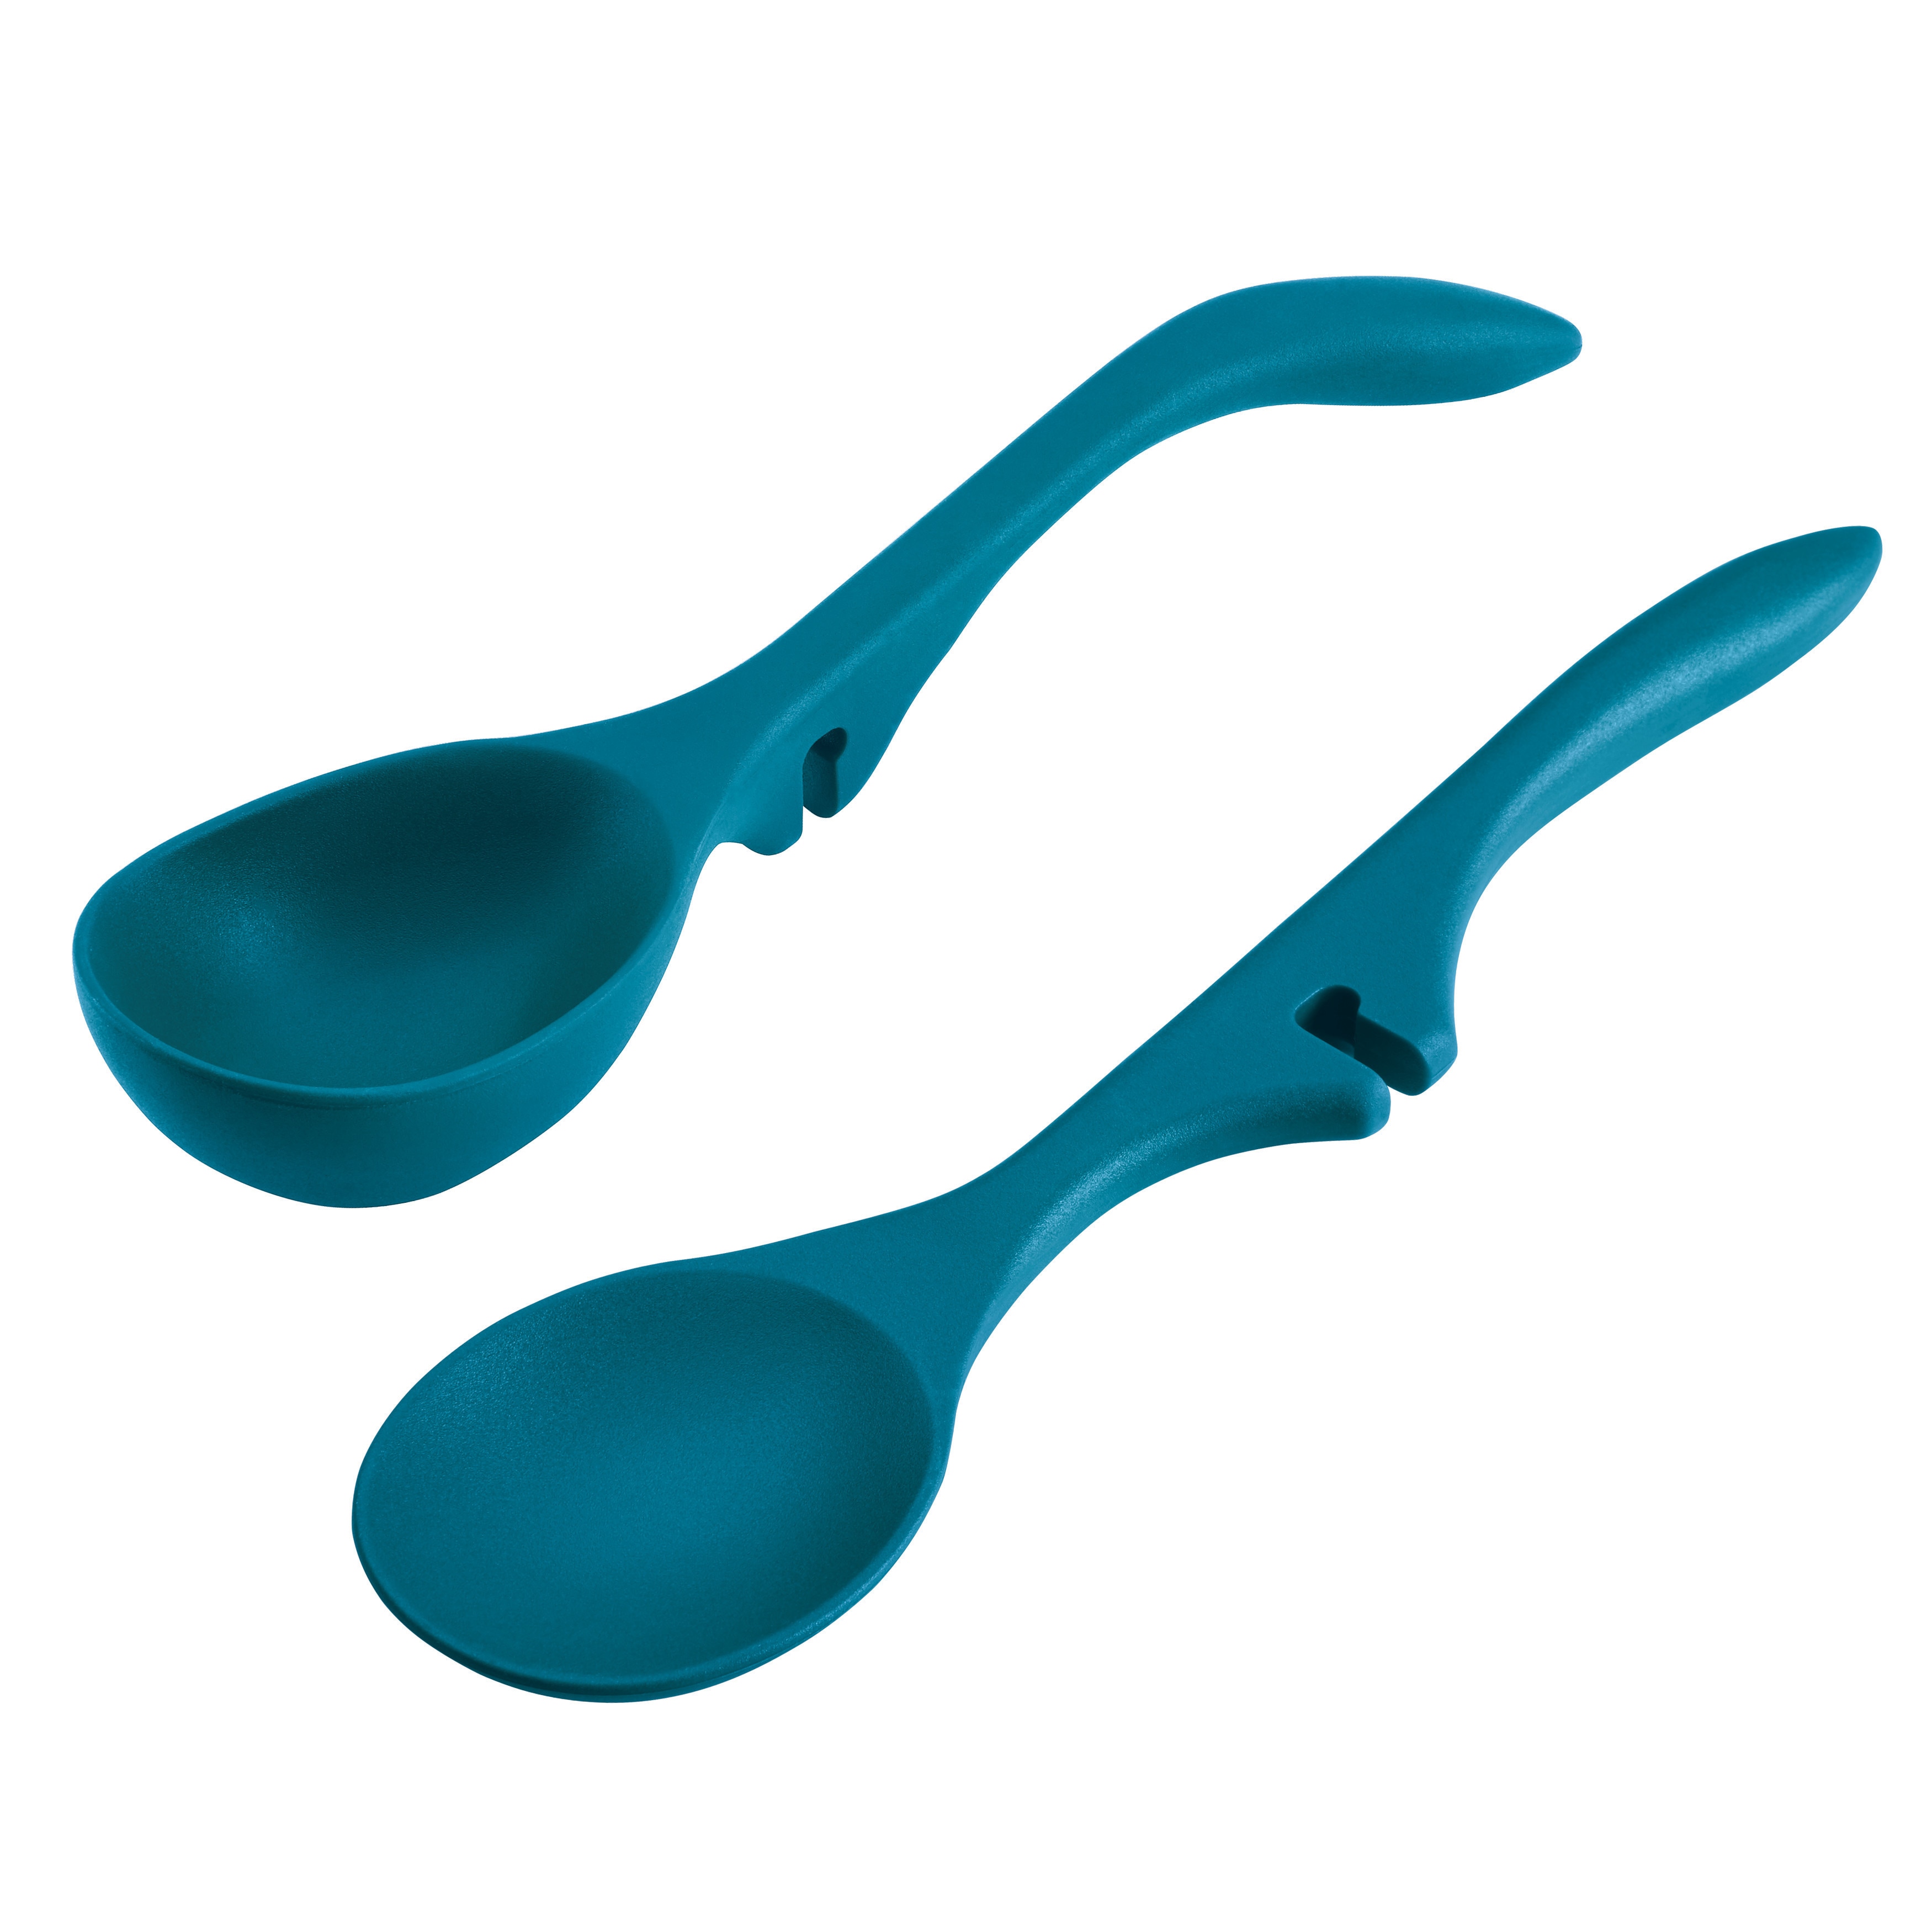 https://ak1.ostkcdn.com/images/products/17666482/Rachael-Ray-Nonstick-Kitchen-Tools-and-Gadgets-Lazy-Spoon-Lazy-Ladle-Set-20986158-ba4c-4dc7-add7-199c4b73a9ee.jpg